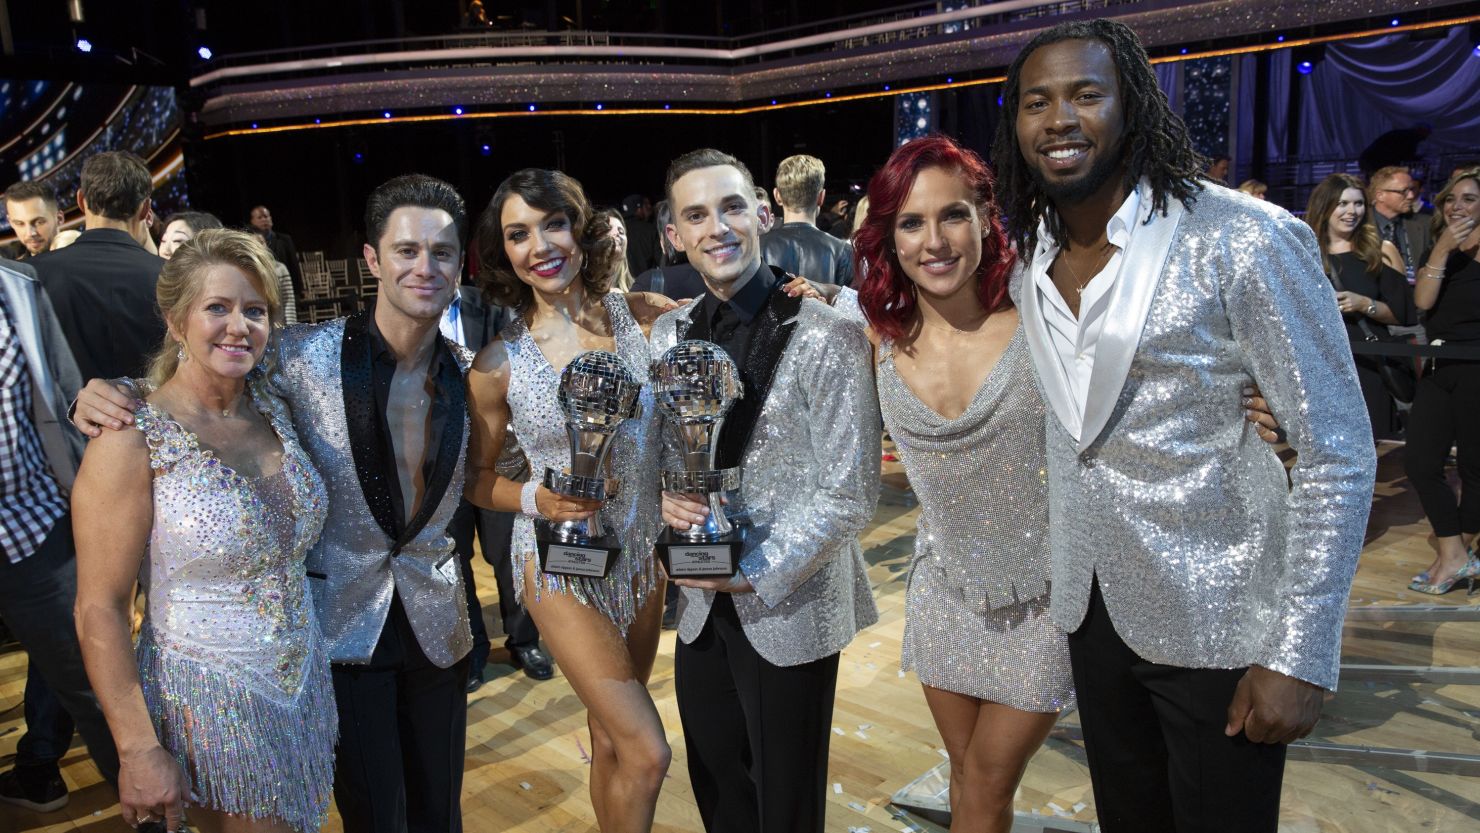 DANCING WITH THE STARS: ATHLETES - "Episode 2604" - After three weeks of stunning competitive dancing, the final three couples advance to the finals of "Dancing with the Stars: Athletes," live on MONDAY, MAY 21 (8:00-9:00 p.m. EDT), on The ABC Television Network. (ABC/Kelsey McNeal)
TONYA HARDING, SASHA FARBER, JENNA JOHNSON, ADAM RIPPON, SHARNA BURGESS, JOSH NORMAN